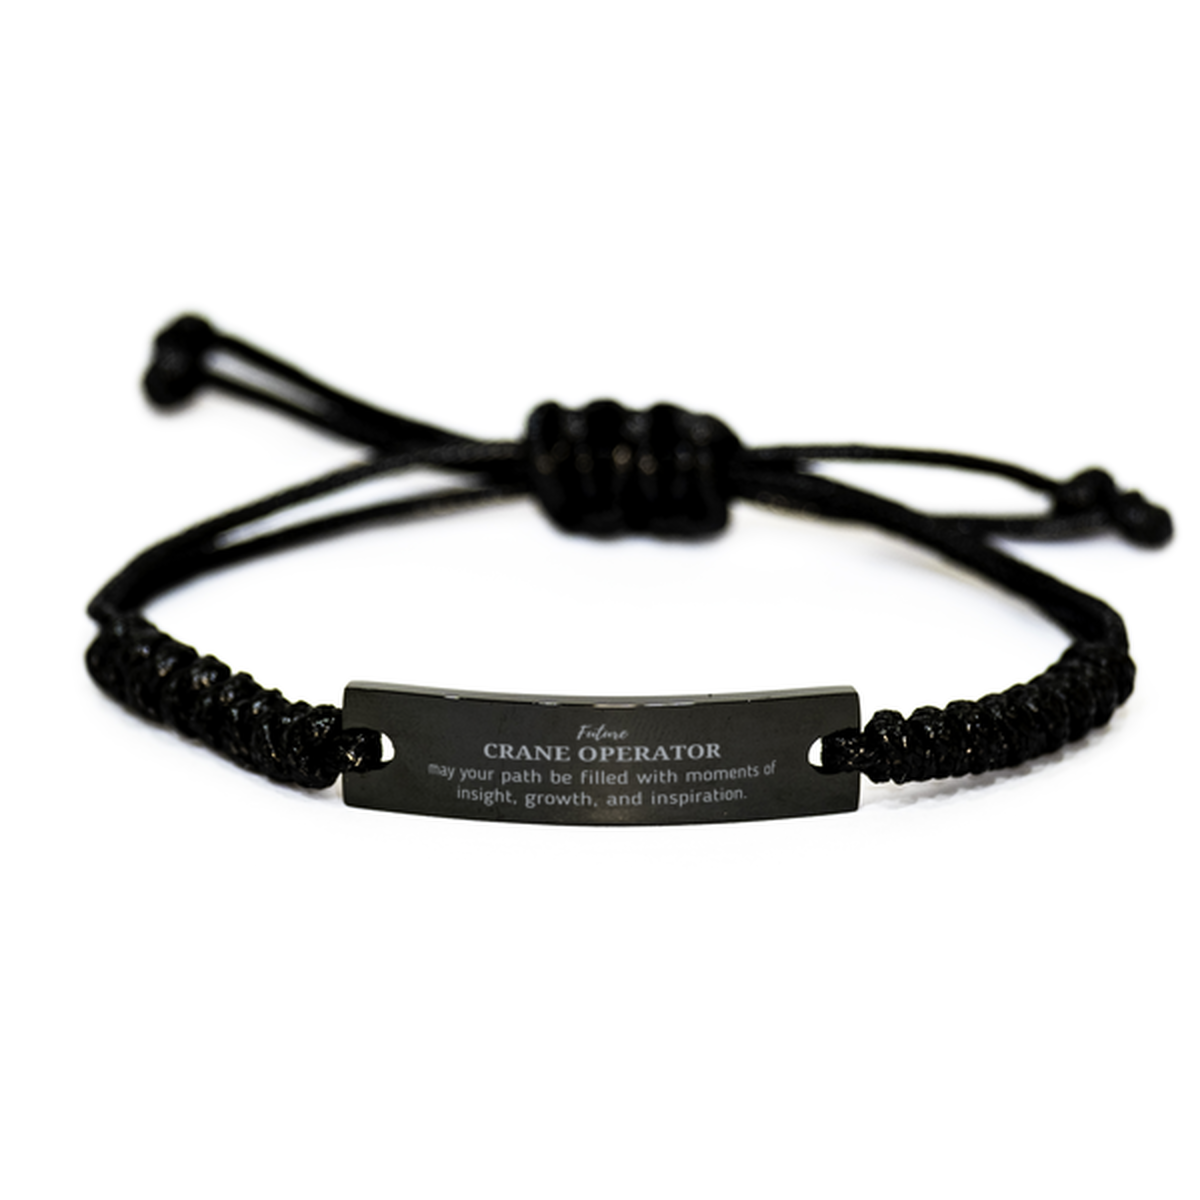 Future Crane Operator Gifts, May your path be filled with moments of insight, Graduation Gifts for New Crane Operator, Christmas Unique Black Rope Bracelet For Men, Women, Friends